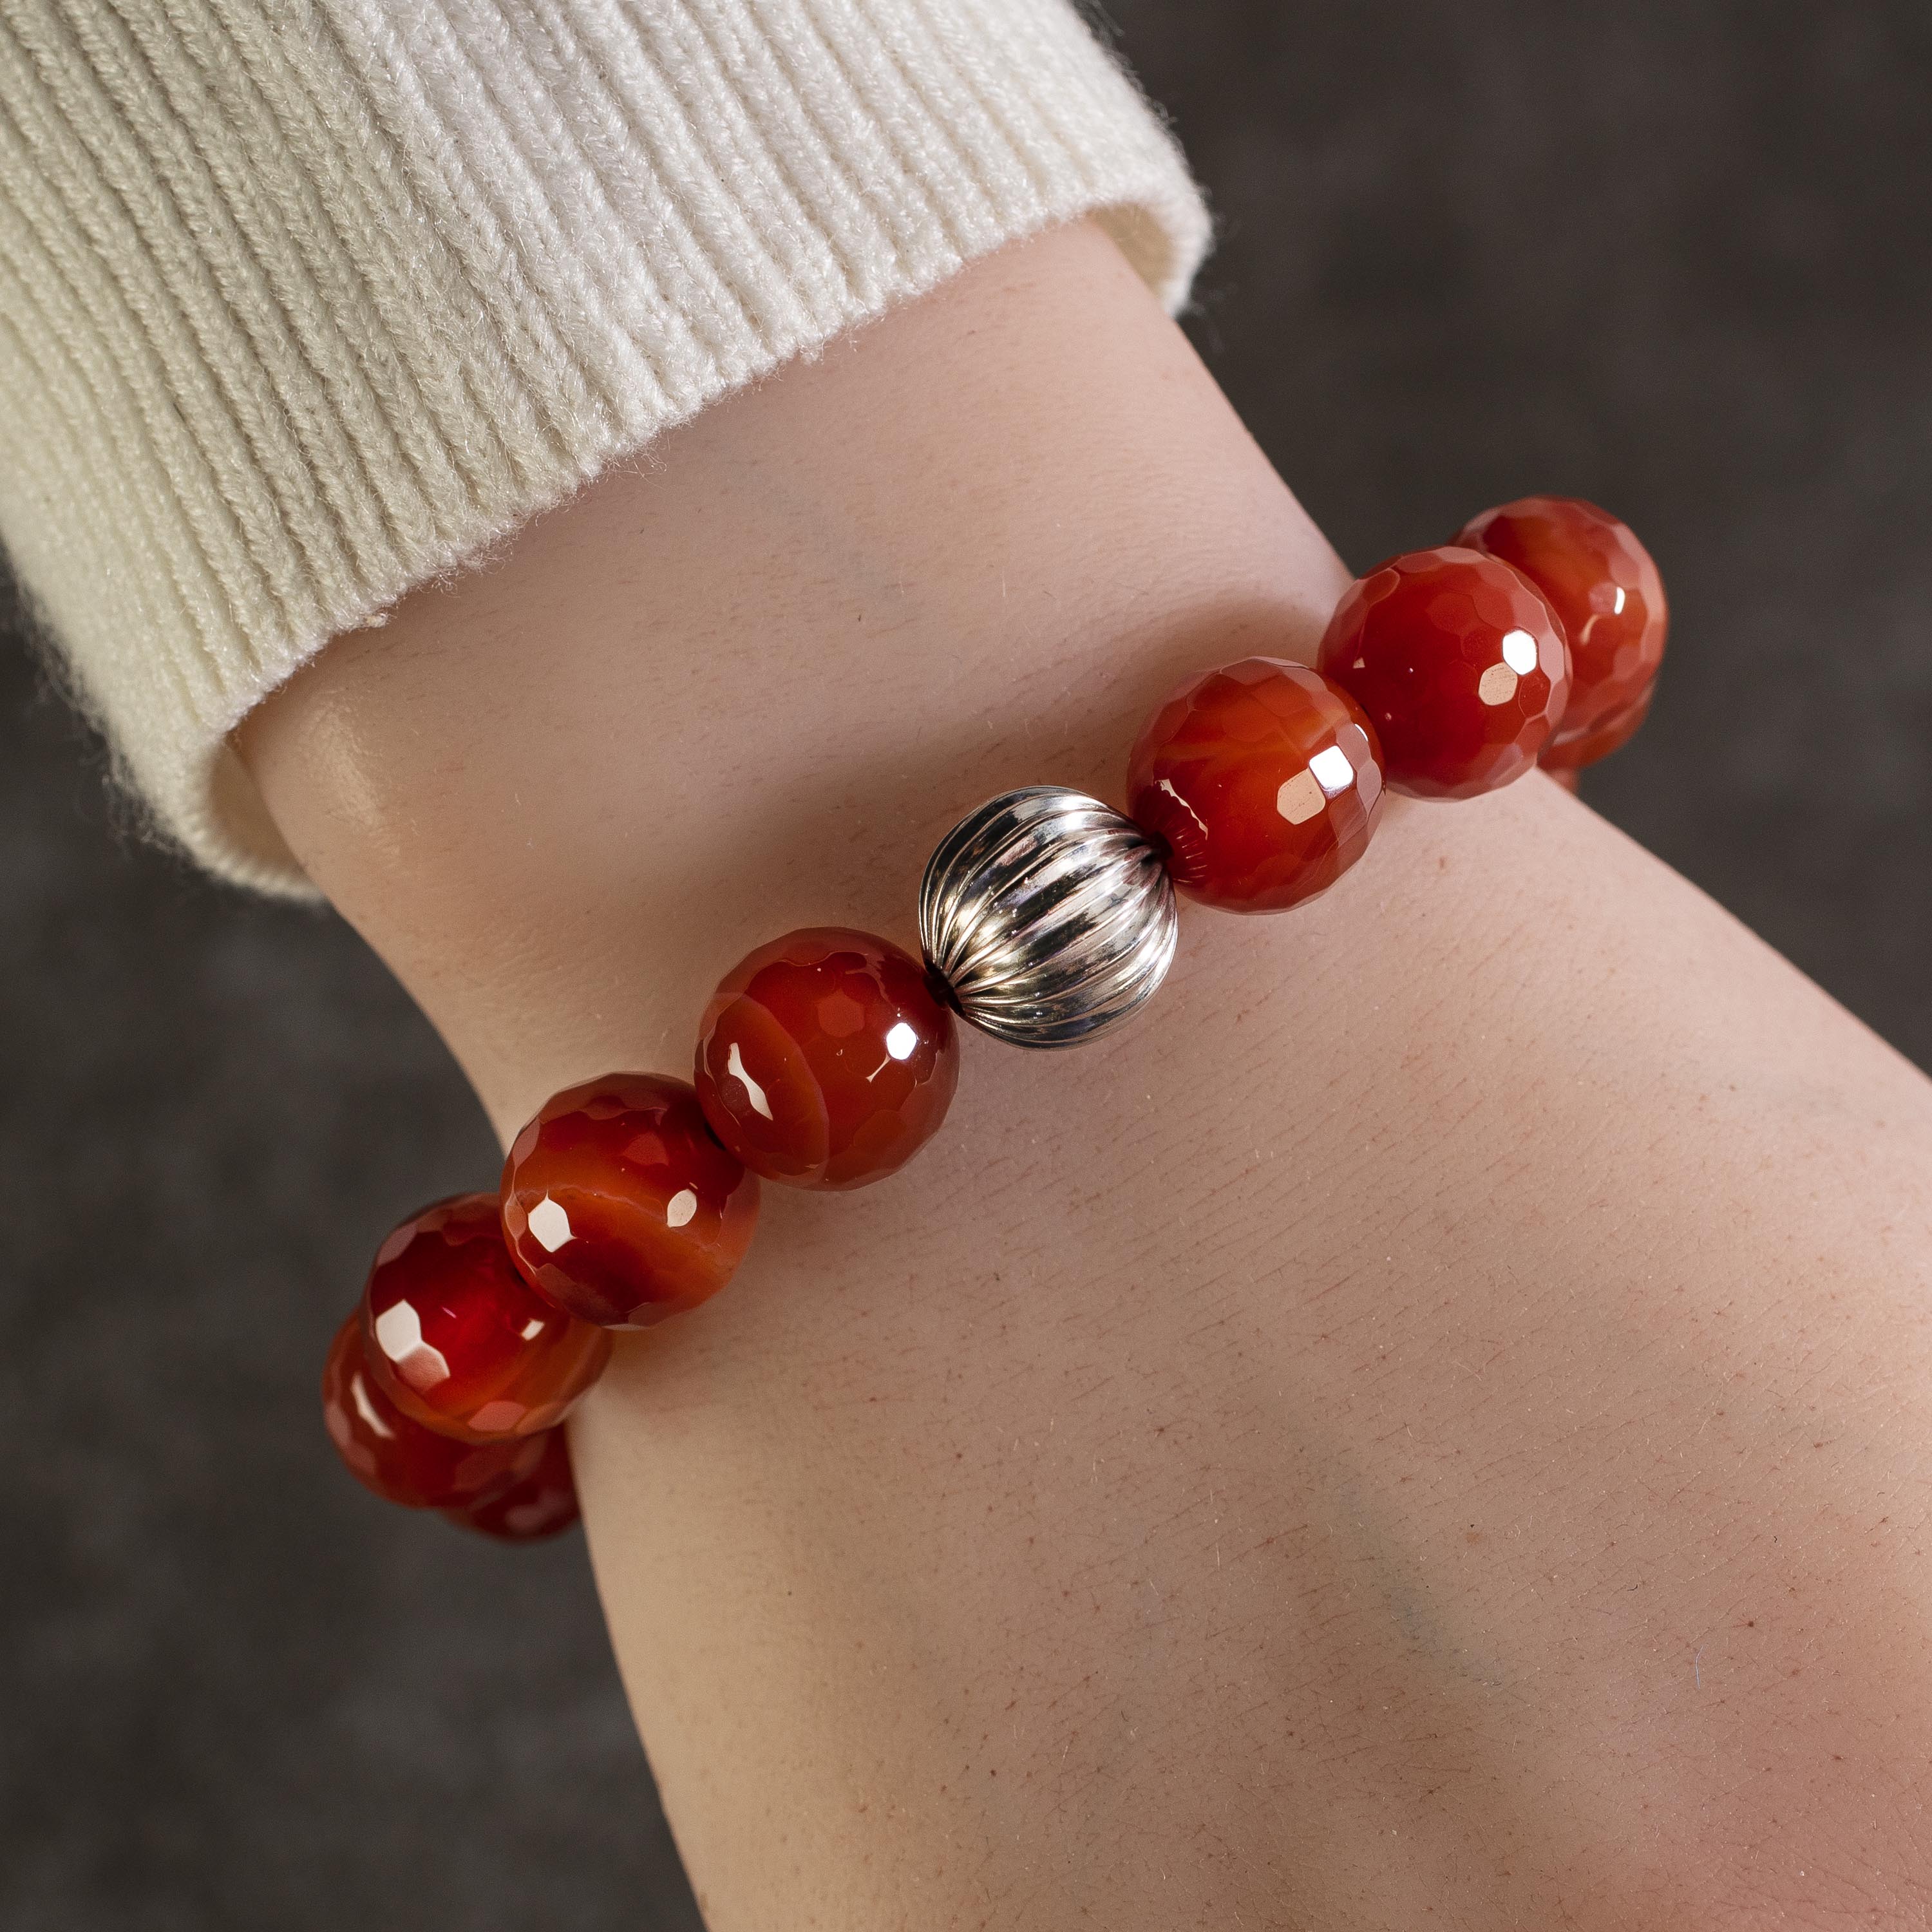 Kalifano Gemstone Bracelets Faceted Carnelian 12mm Natural Gemstone Bead Elastic Bracelet with Silver Accent Bead PLAT-BGP-014